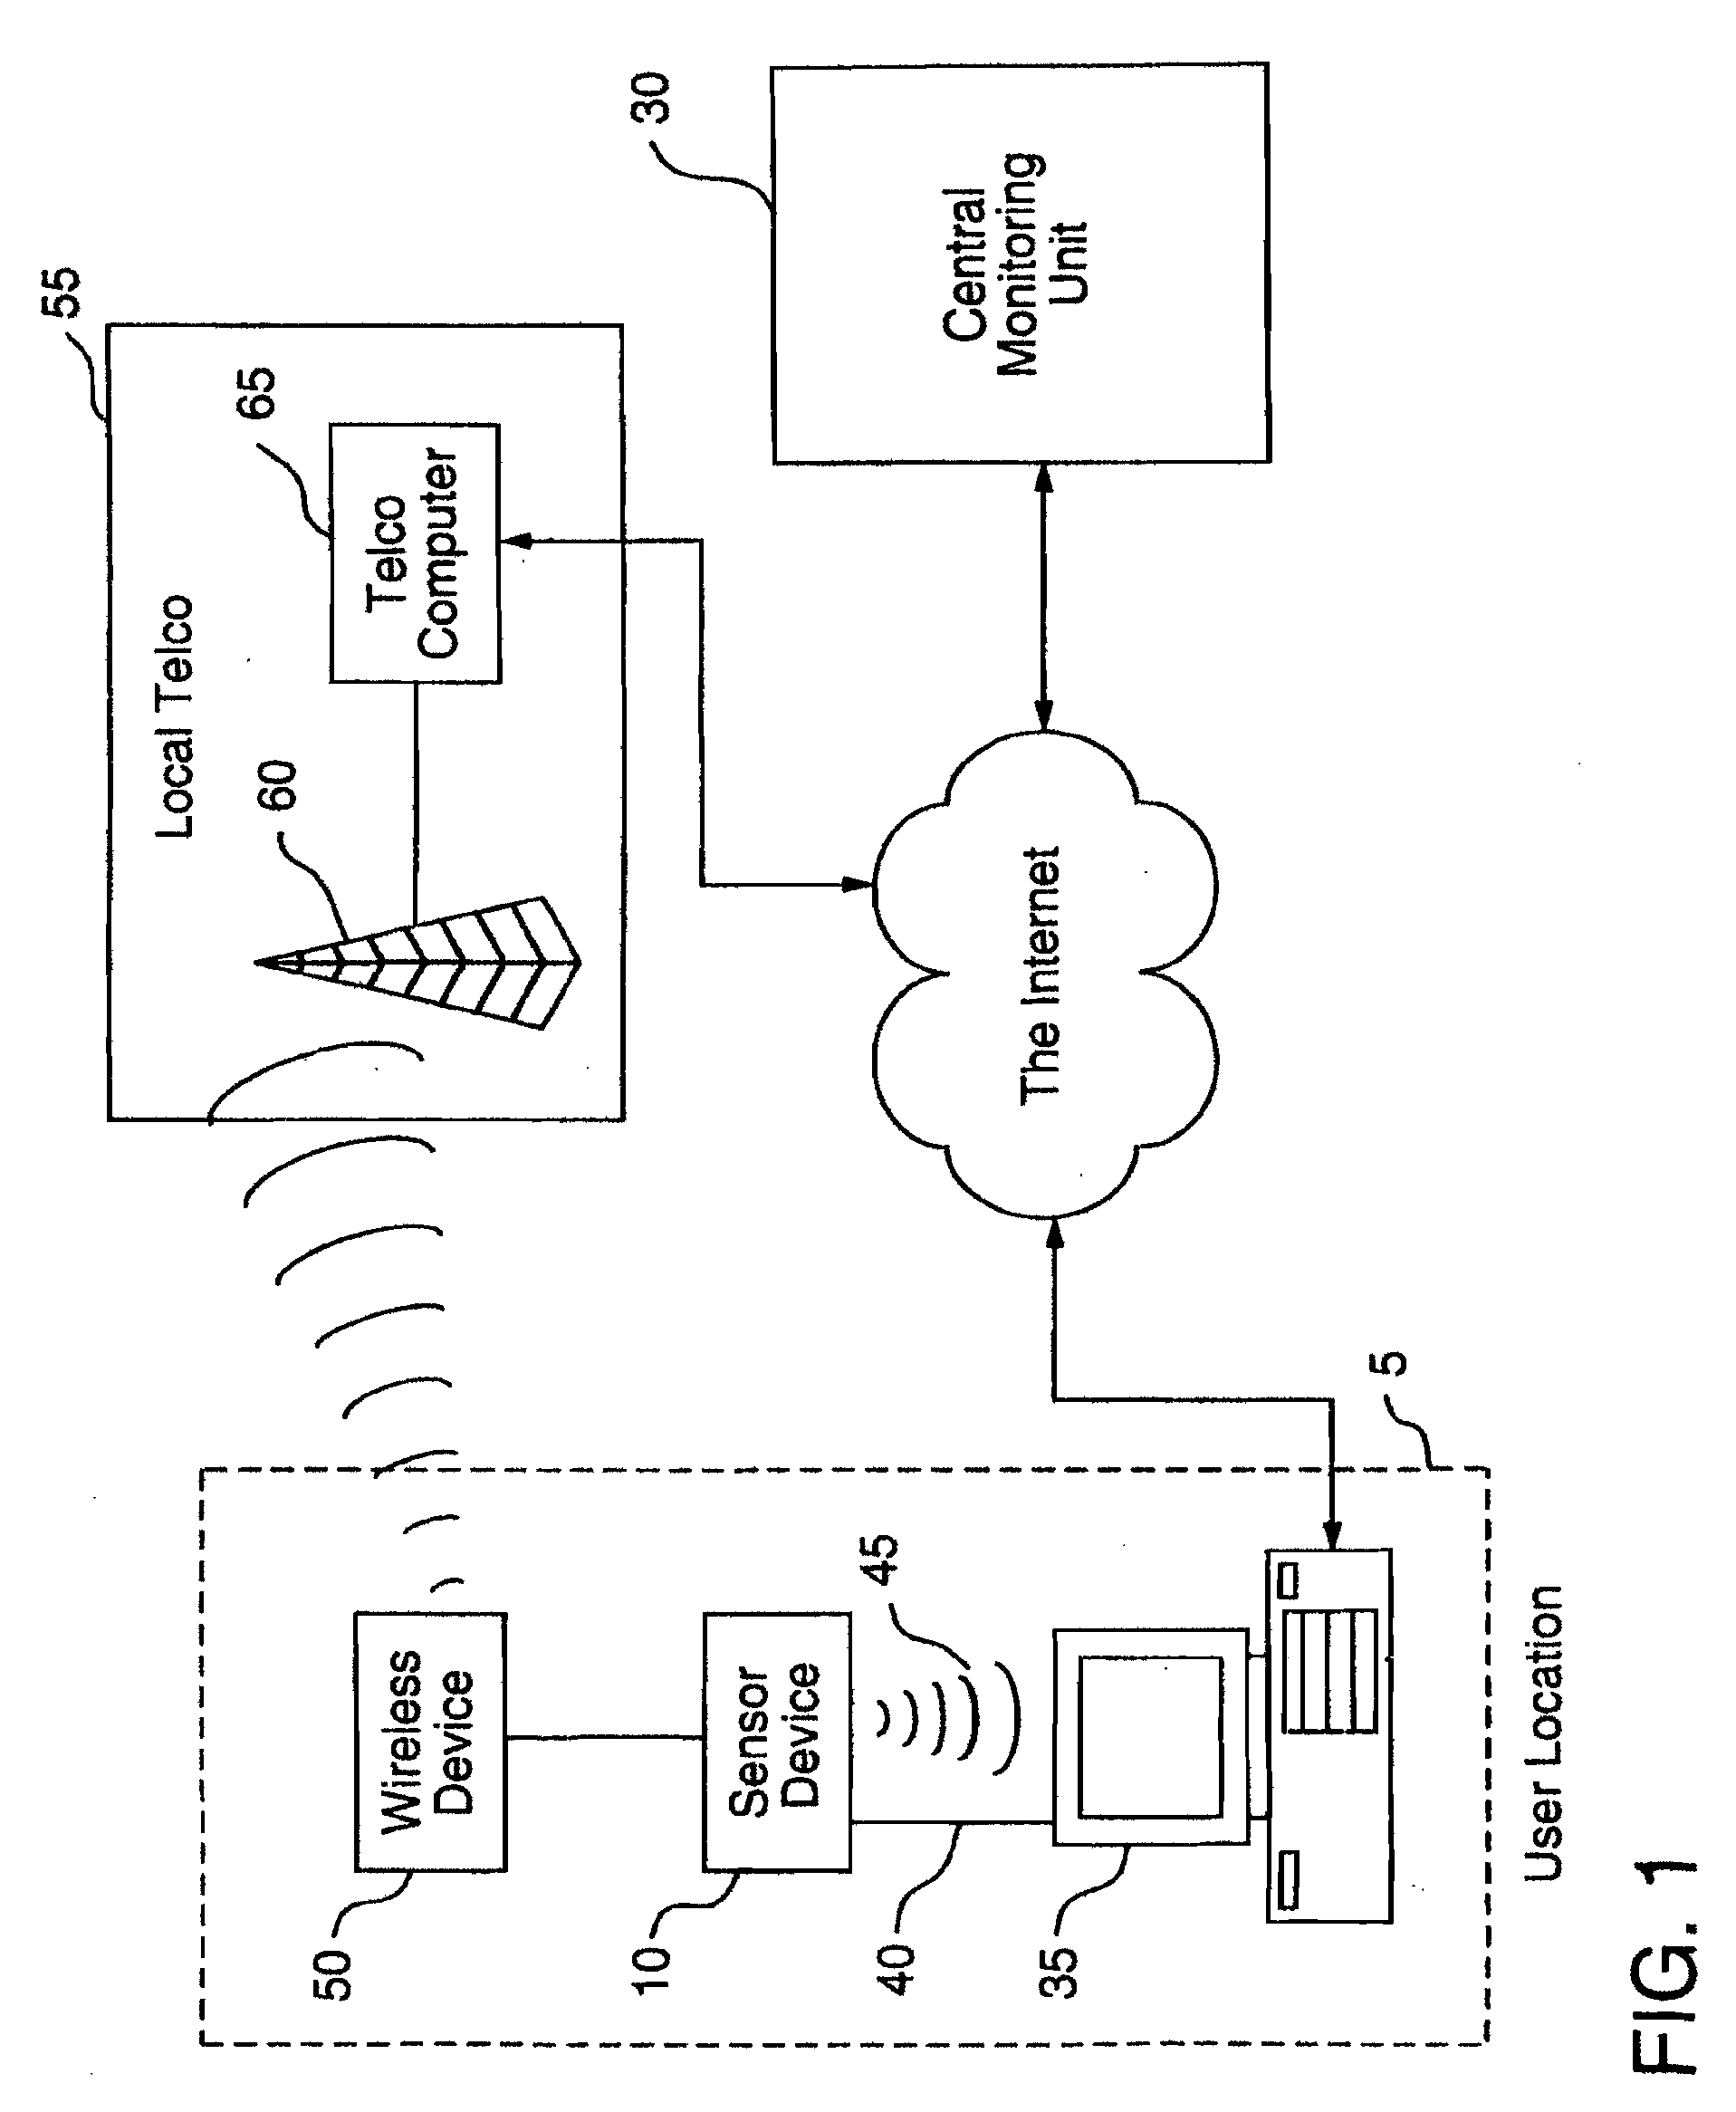 Multi-sensor system, device, and method for deriving human status information